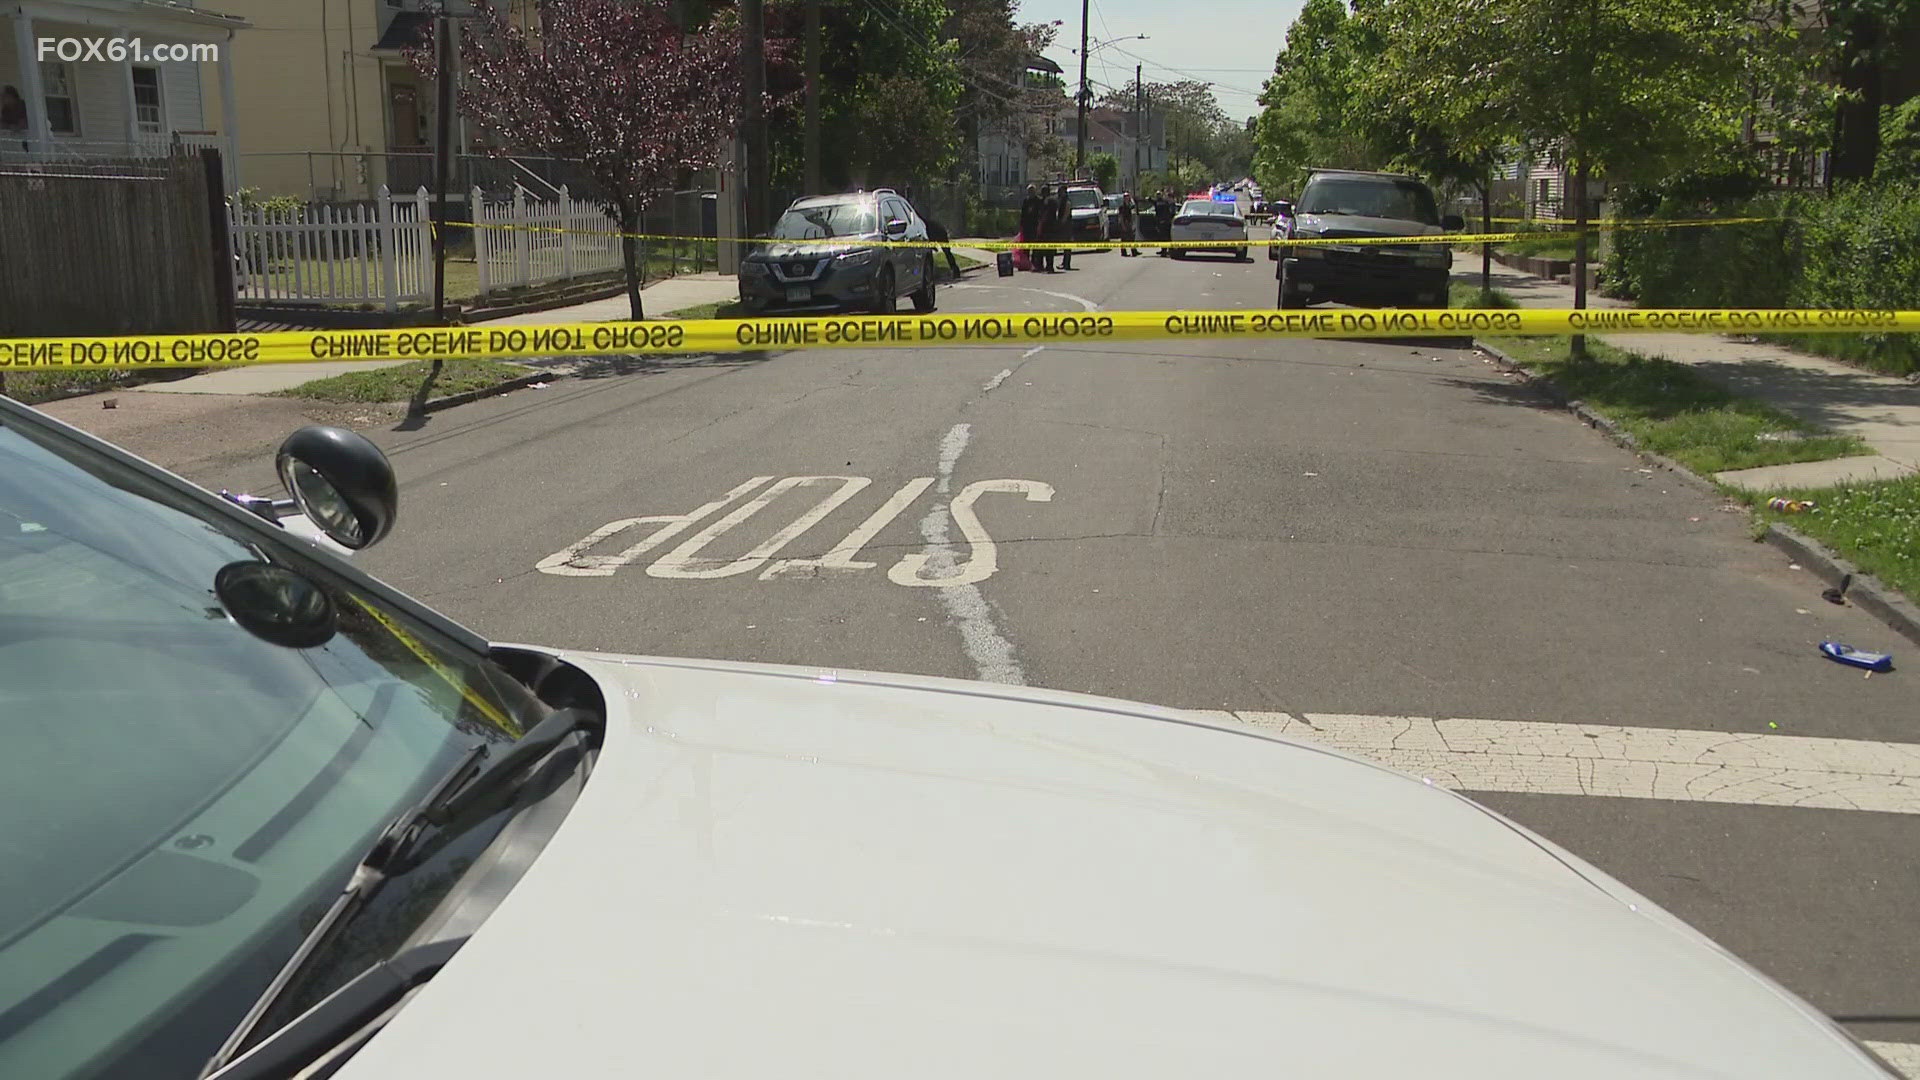 A homicide investigation is underway near Ferry and Wolcott Streets in New Haven.